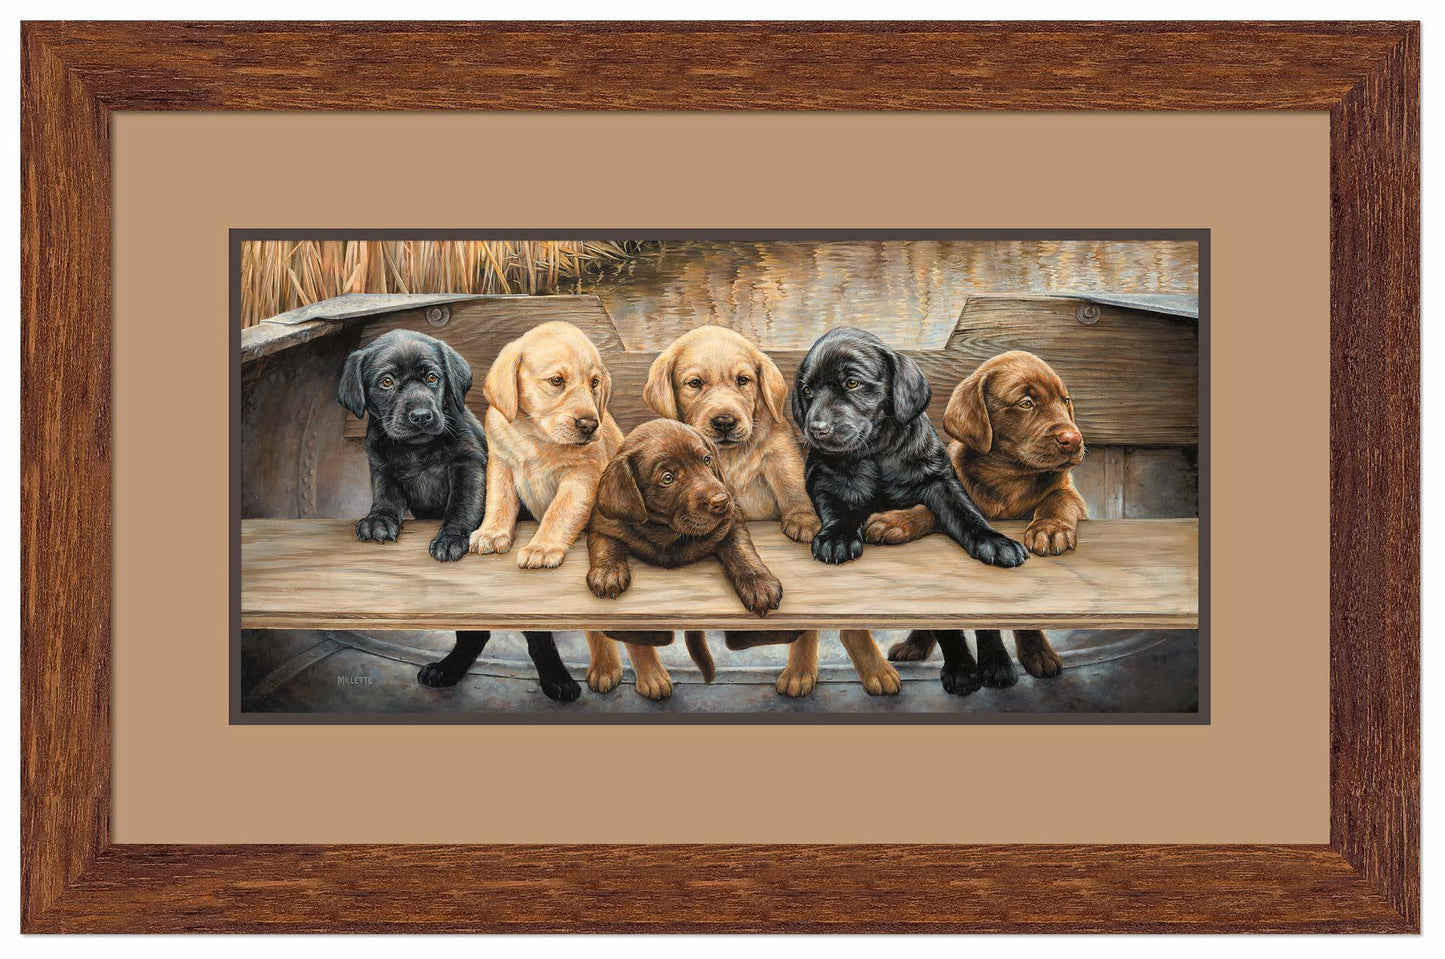 More Hands on Deck—Six Puppies Artist Proof Paper Print - Wild Wings